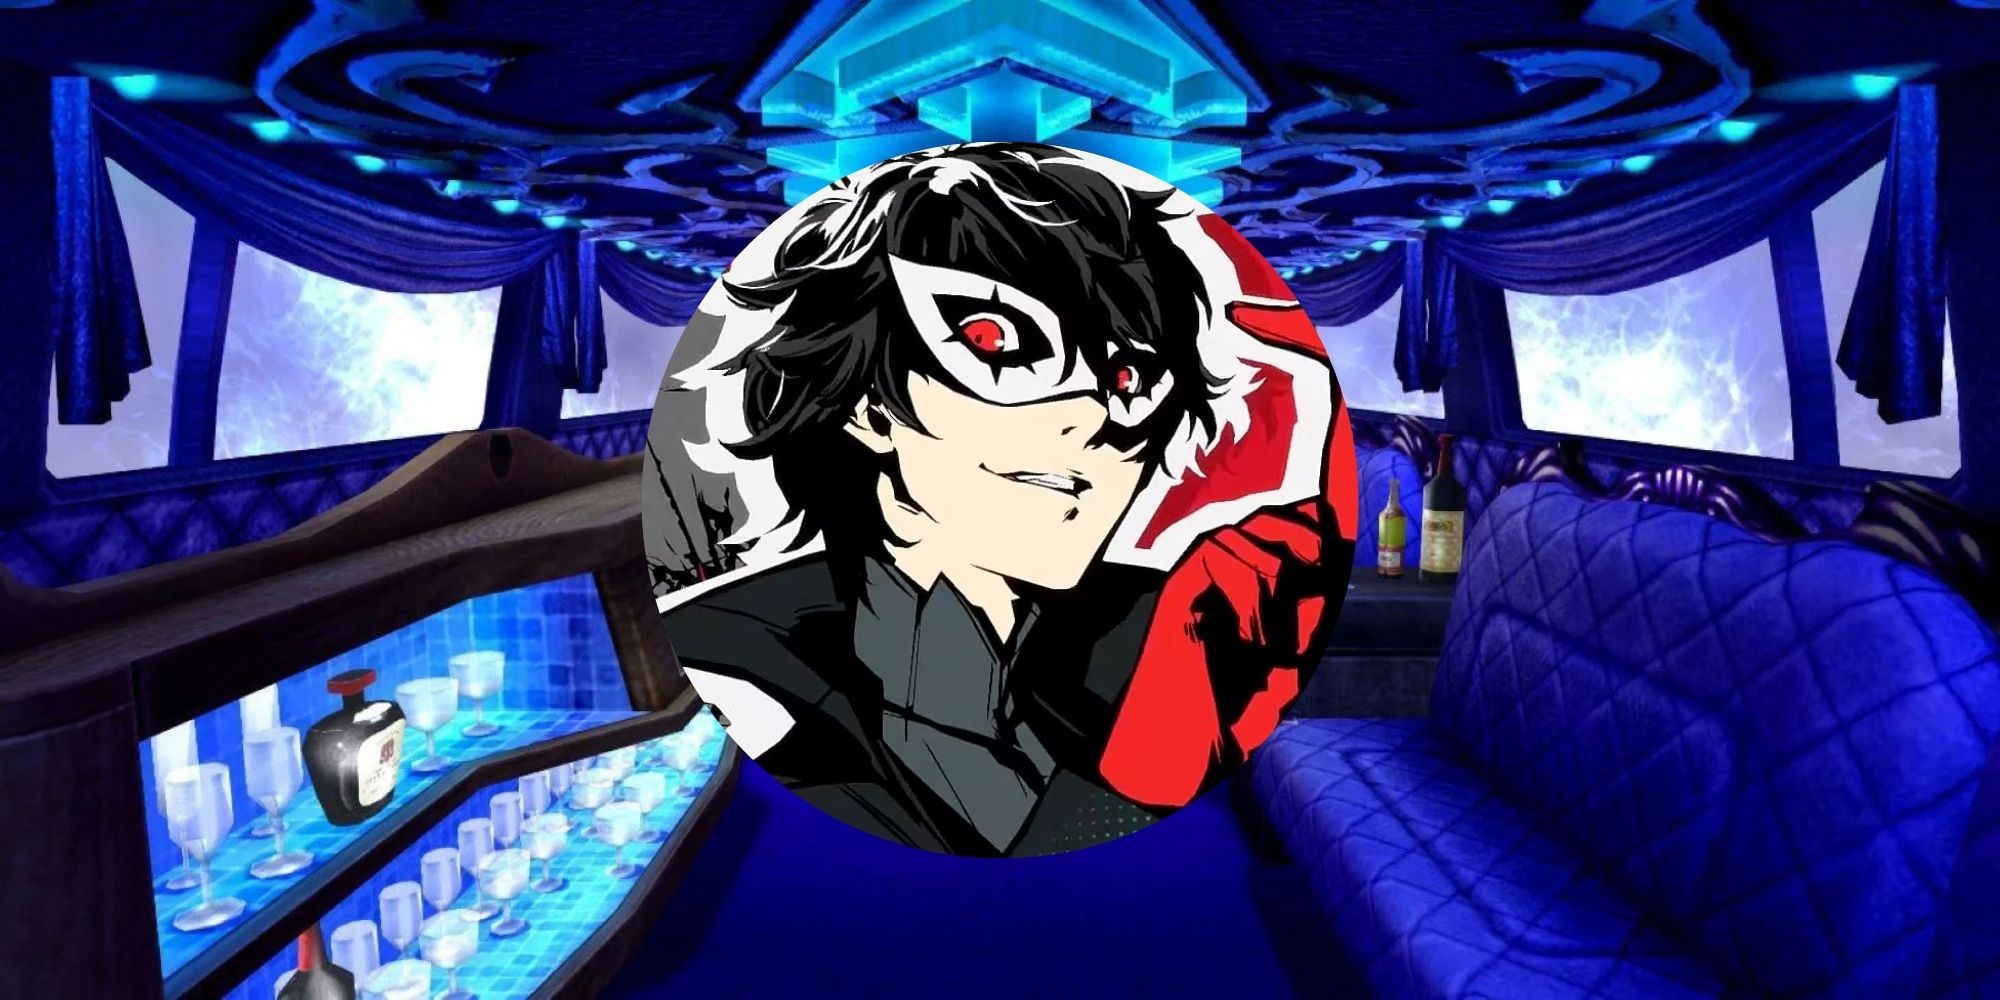 How Long All Persona Games Featured Image Of Image of Joker is circle with velvet room behind them